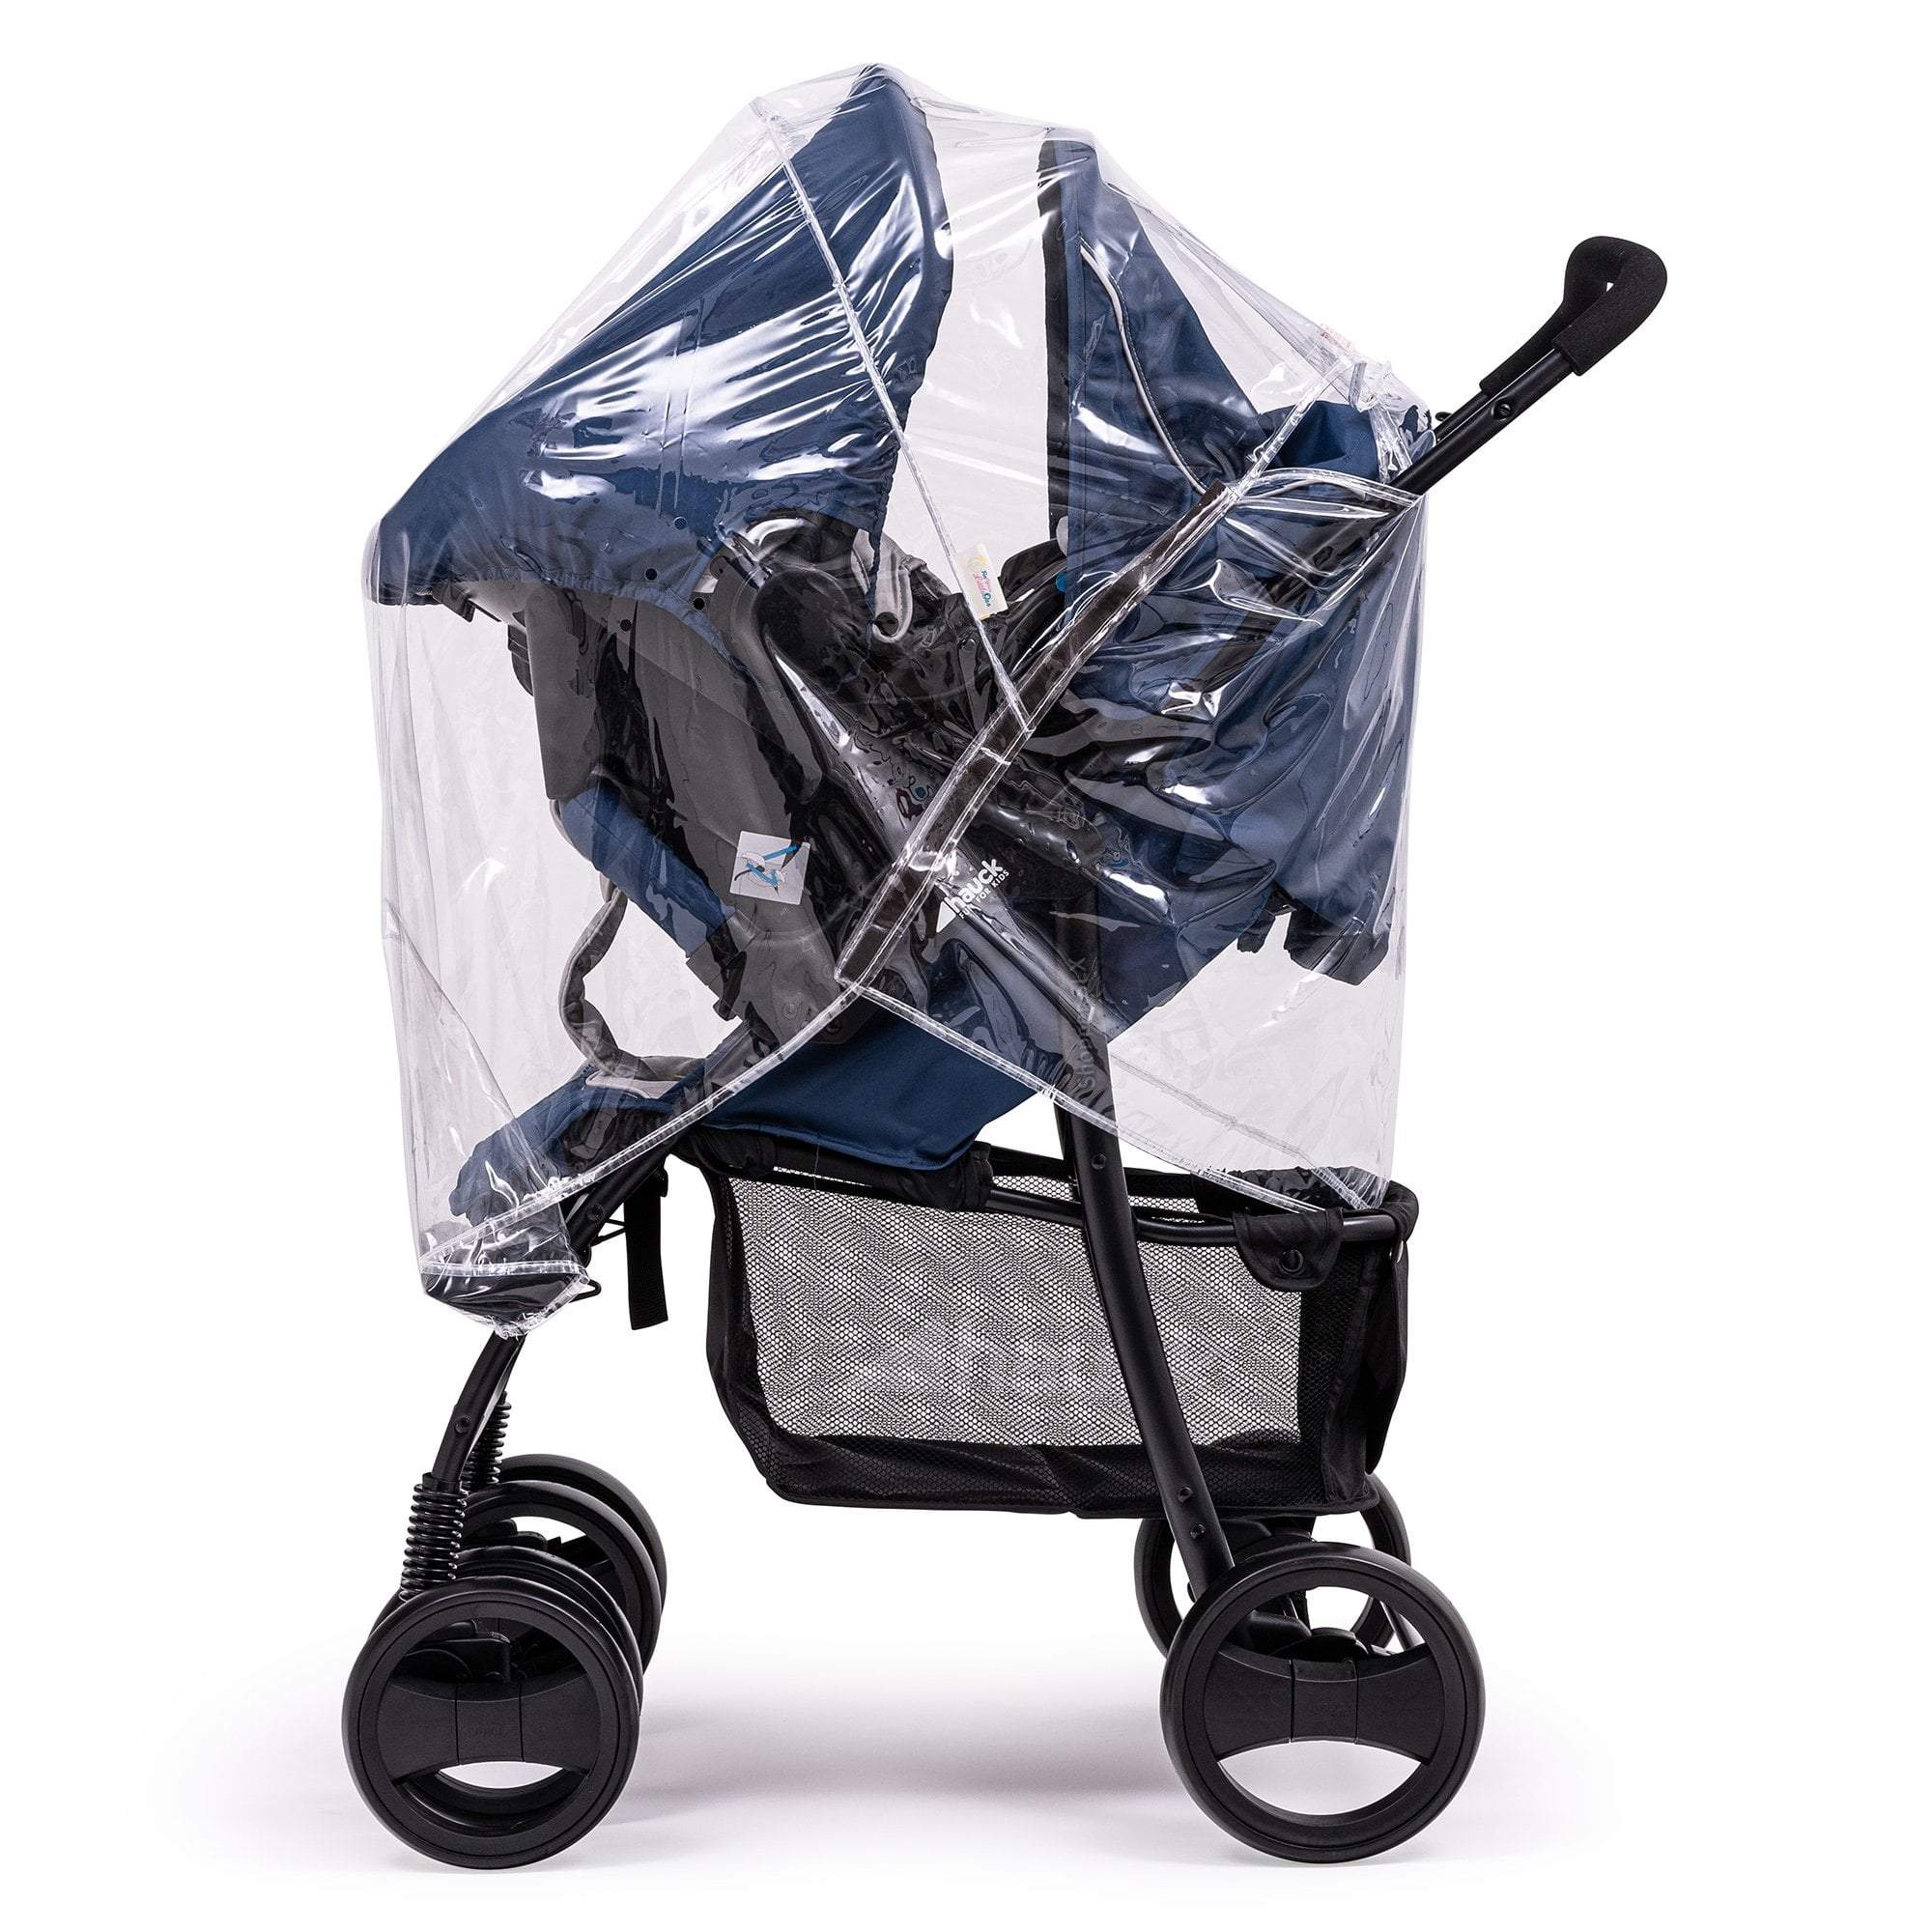 Travel System Raincover Compatible with Diono - Fits All Models - For Your Little One